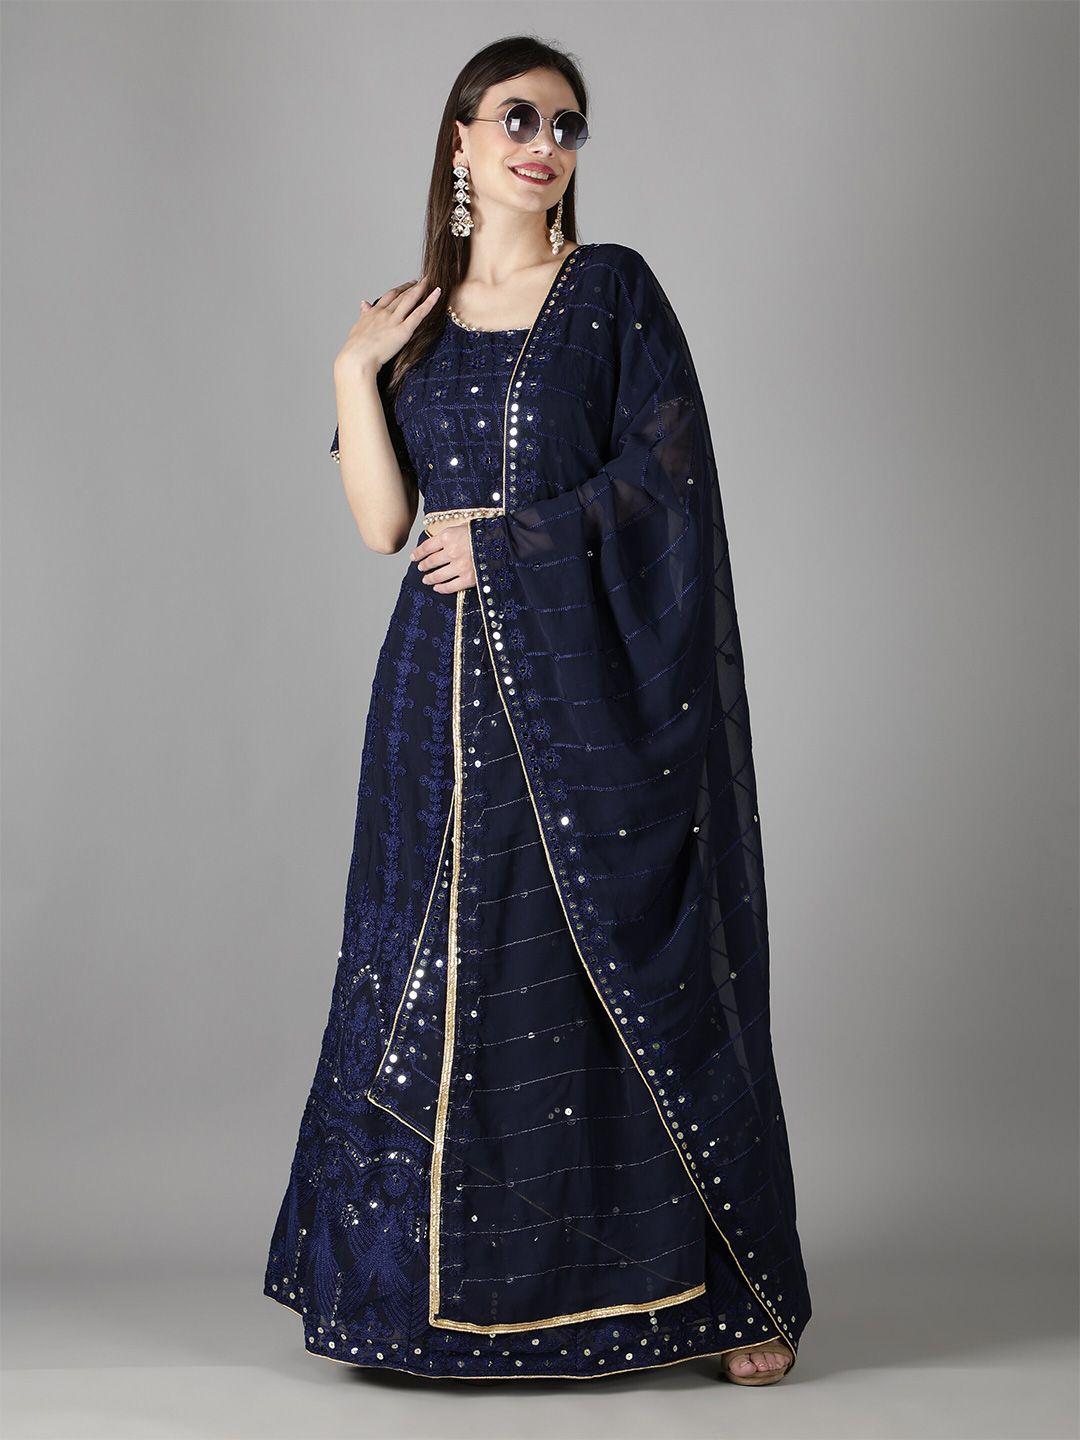 bollyclues embroidered mirror work semi-stitched lehenga & unstitched blouse with